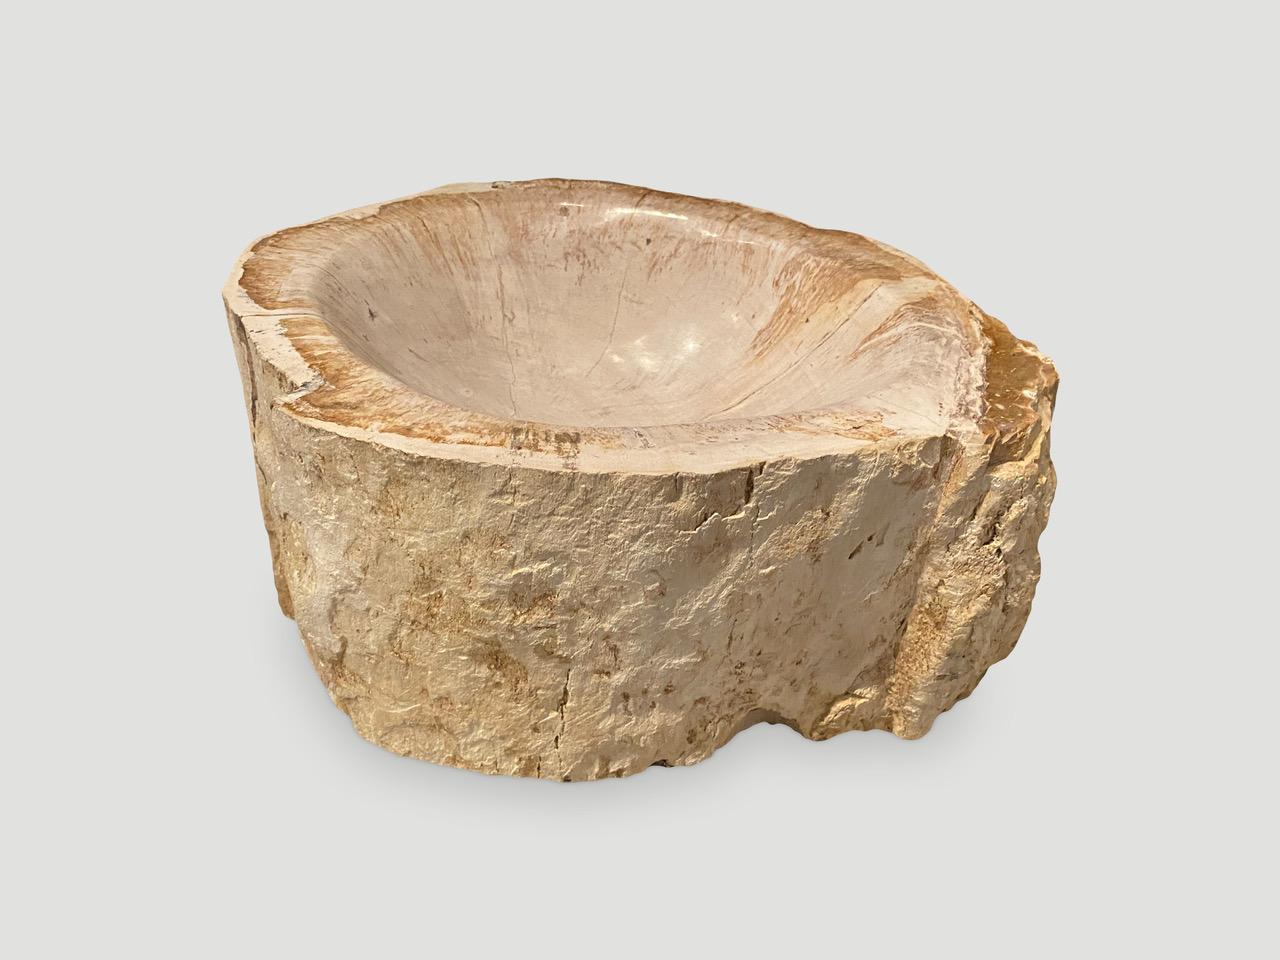 Beautiful petrified wood bowl. We have polished the inside and left the outer layer raw in contrast.

As with a diamond, we polish the highest quality fossilized petrified wood, using our latest ground breaking technology, to reveal its natural